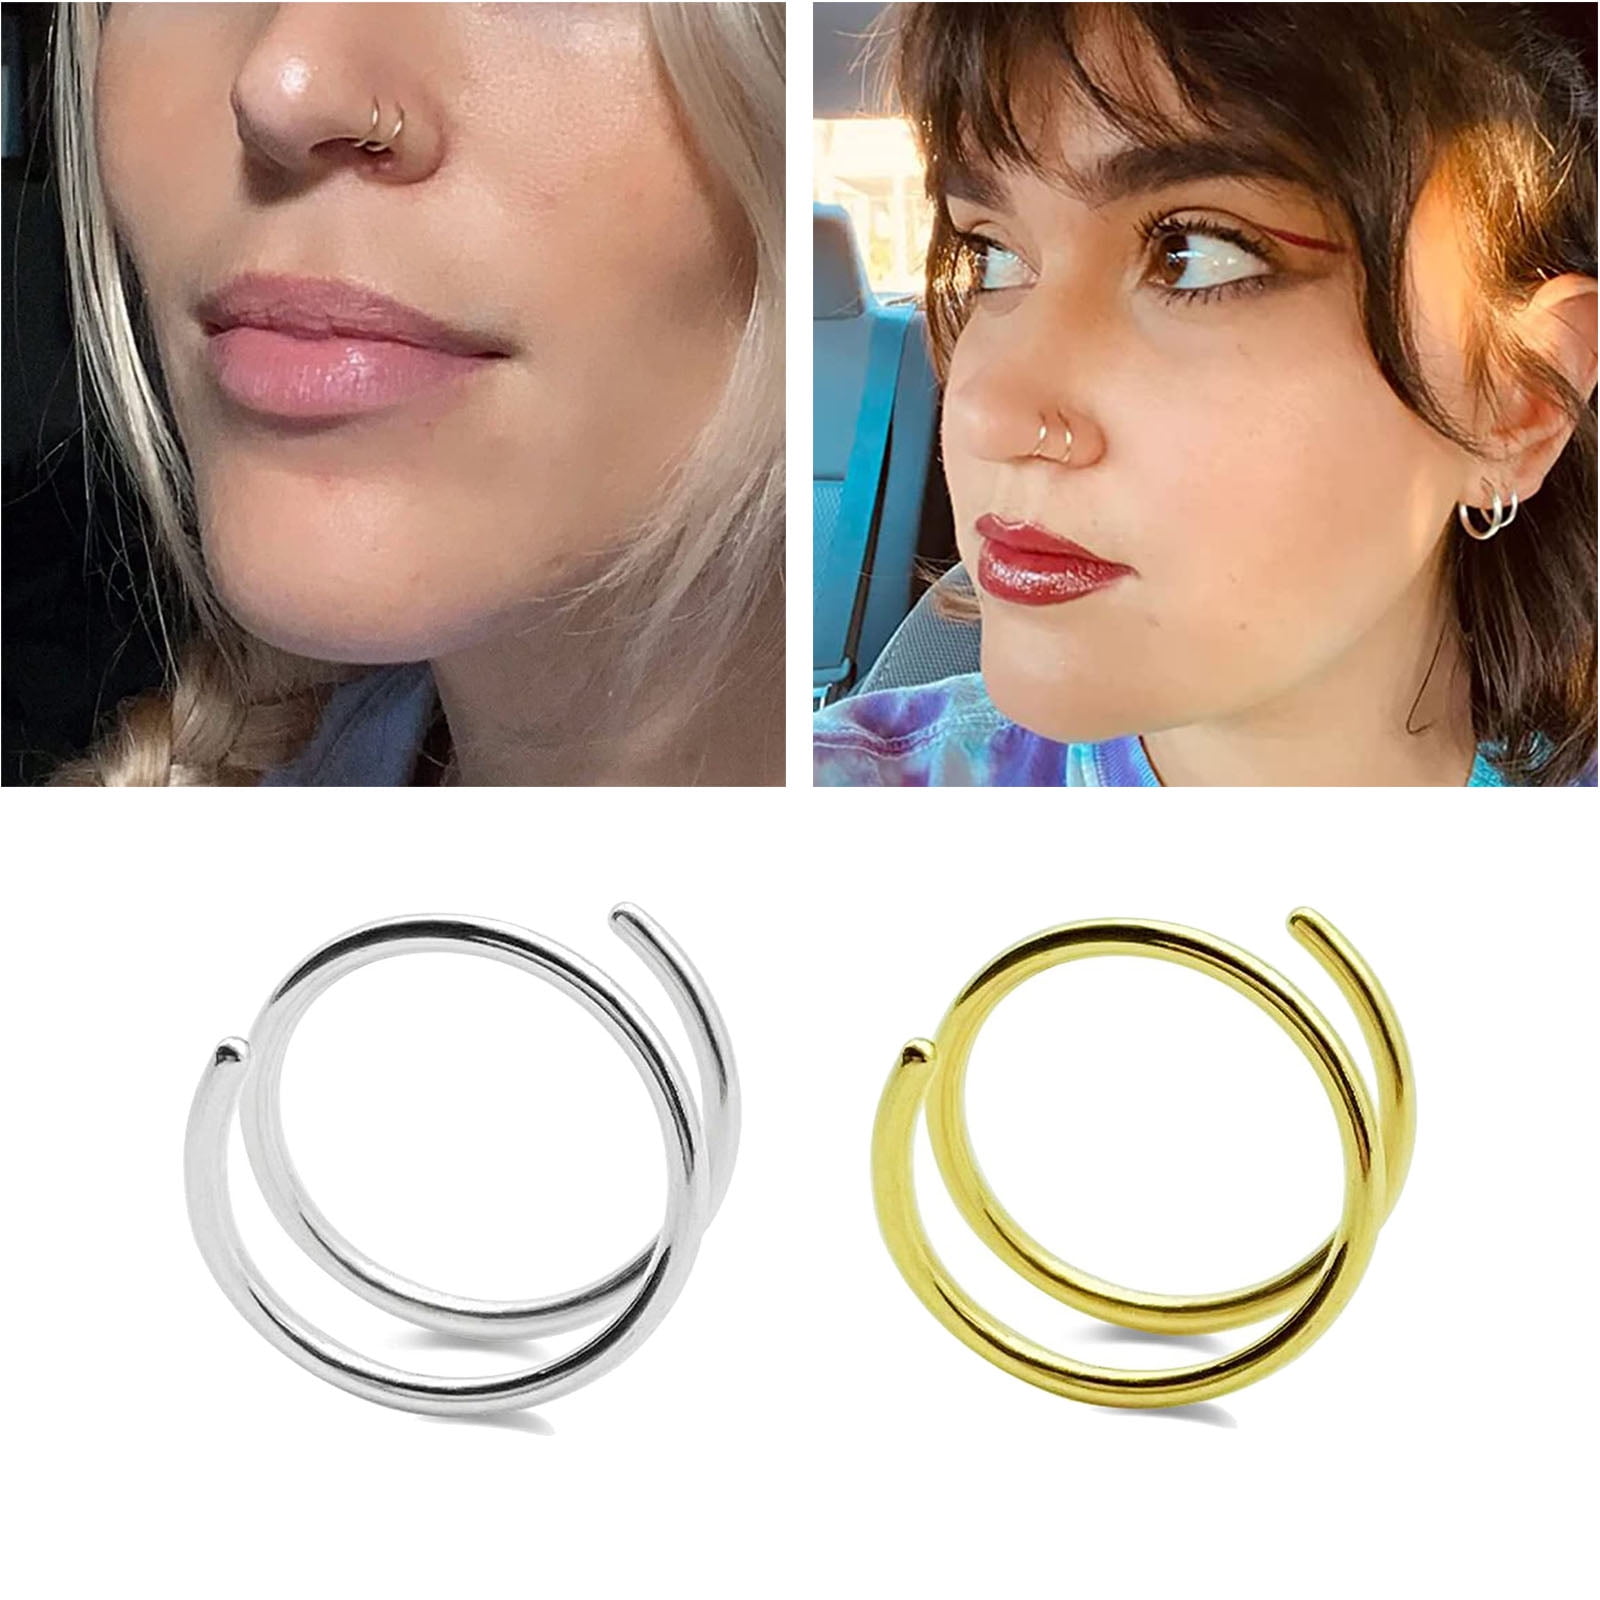 Nose Ring Piercing - Double Nose Ring - Nose Hoop - Double Hoop for a  Single Pierced Nose (9 mm LEFT, 14k Gold Filled - 18 gauge) - Yahoo Shopping